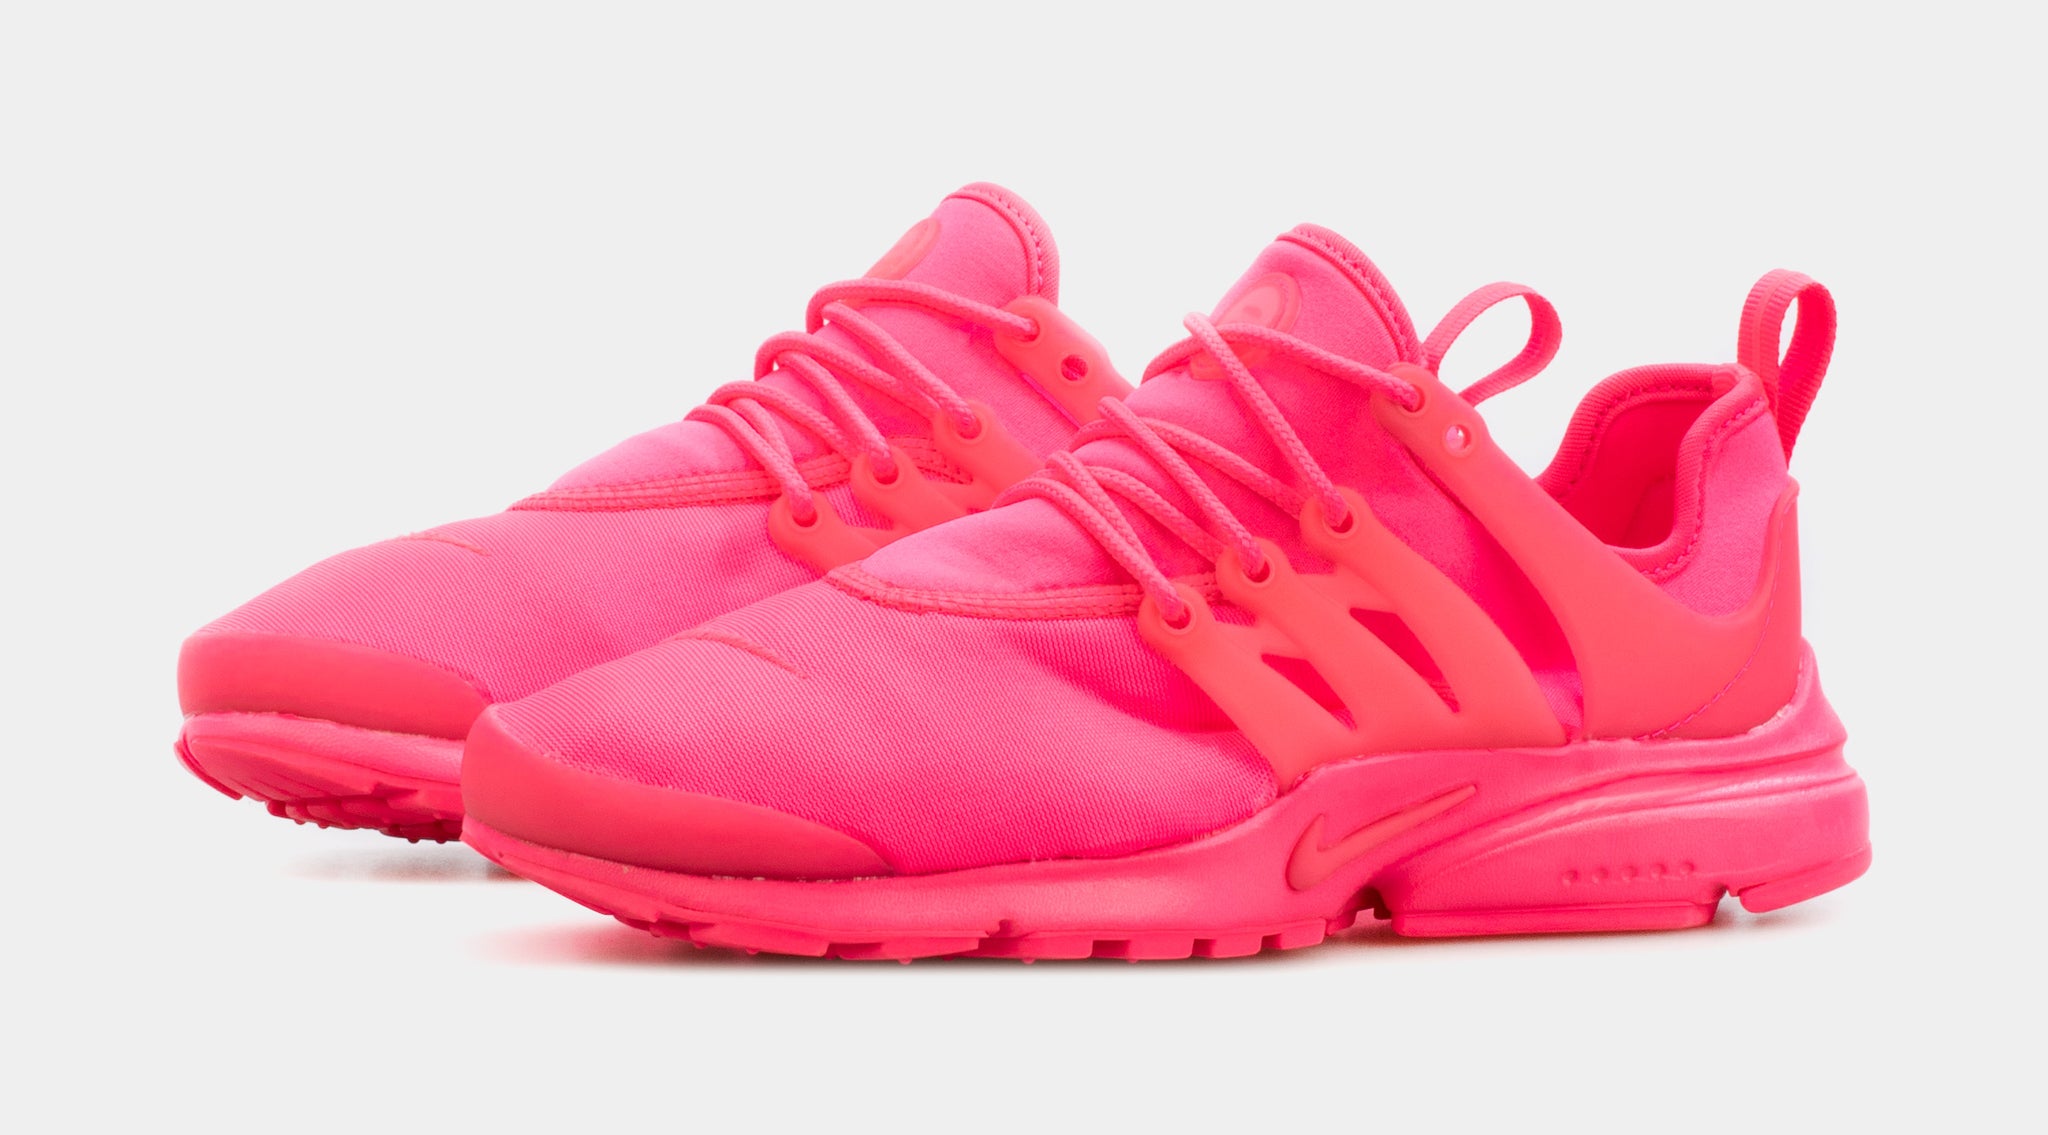 Nike Air Presto Womens Running Shoes Pink FD0290-600 – Shoe Palace